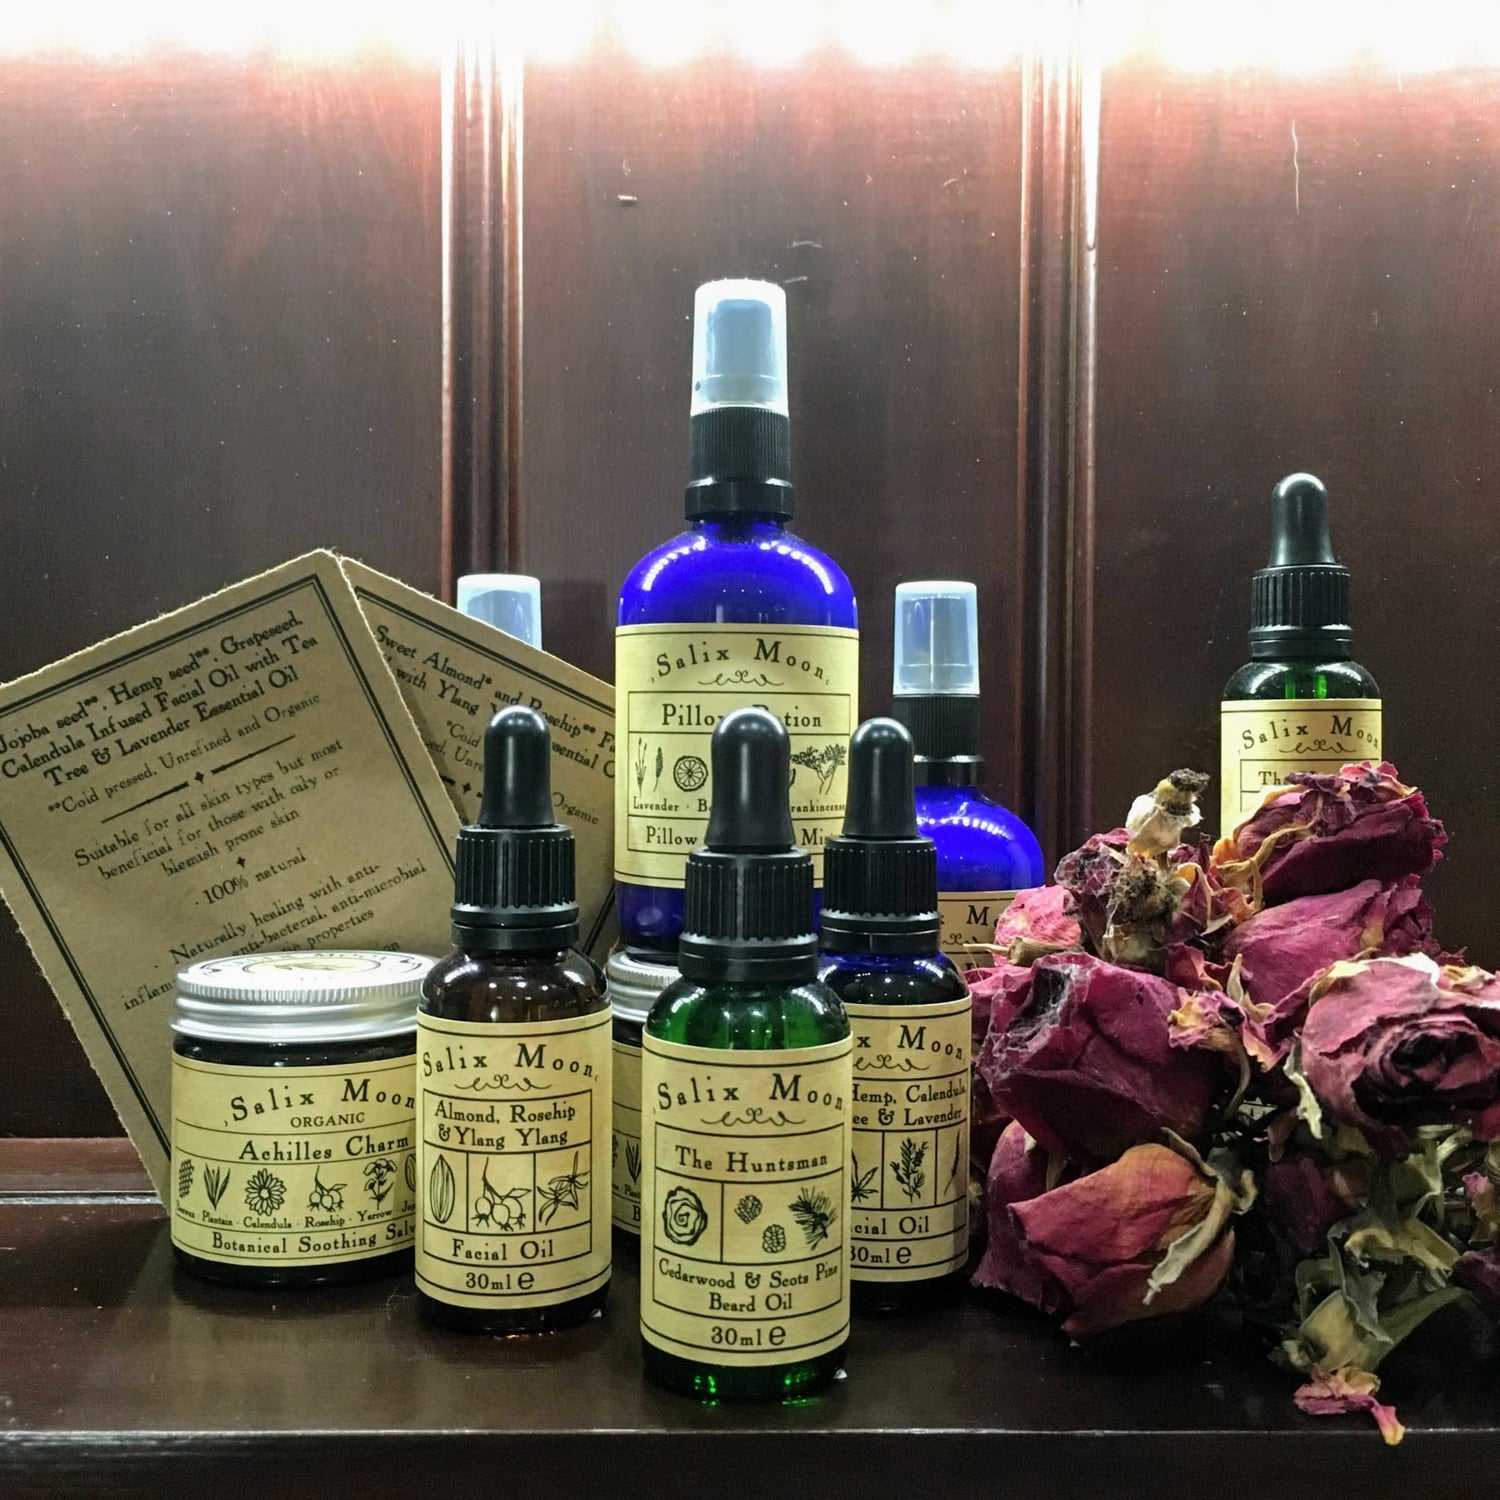 Bottles of pillow potion, beard oil and facial oil, and a jar of Achilles Charm salve, next to dried roses